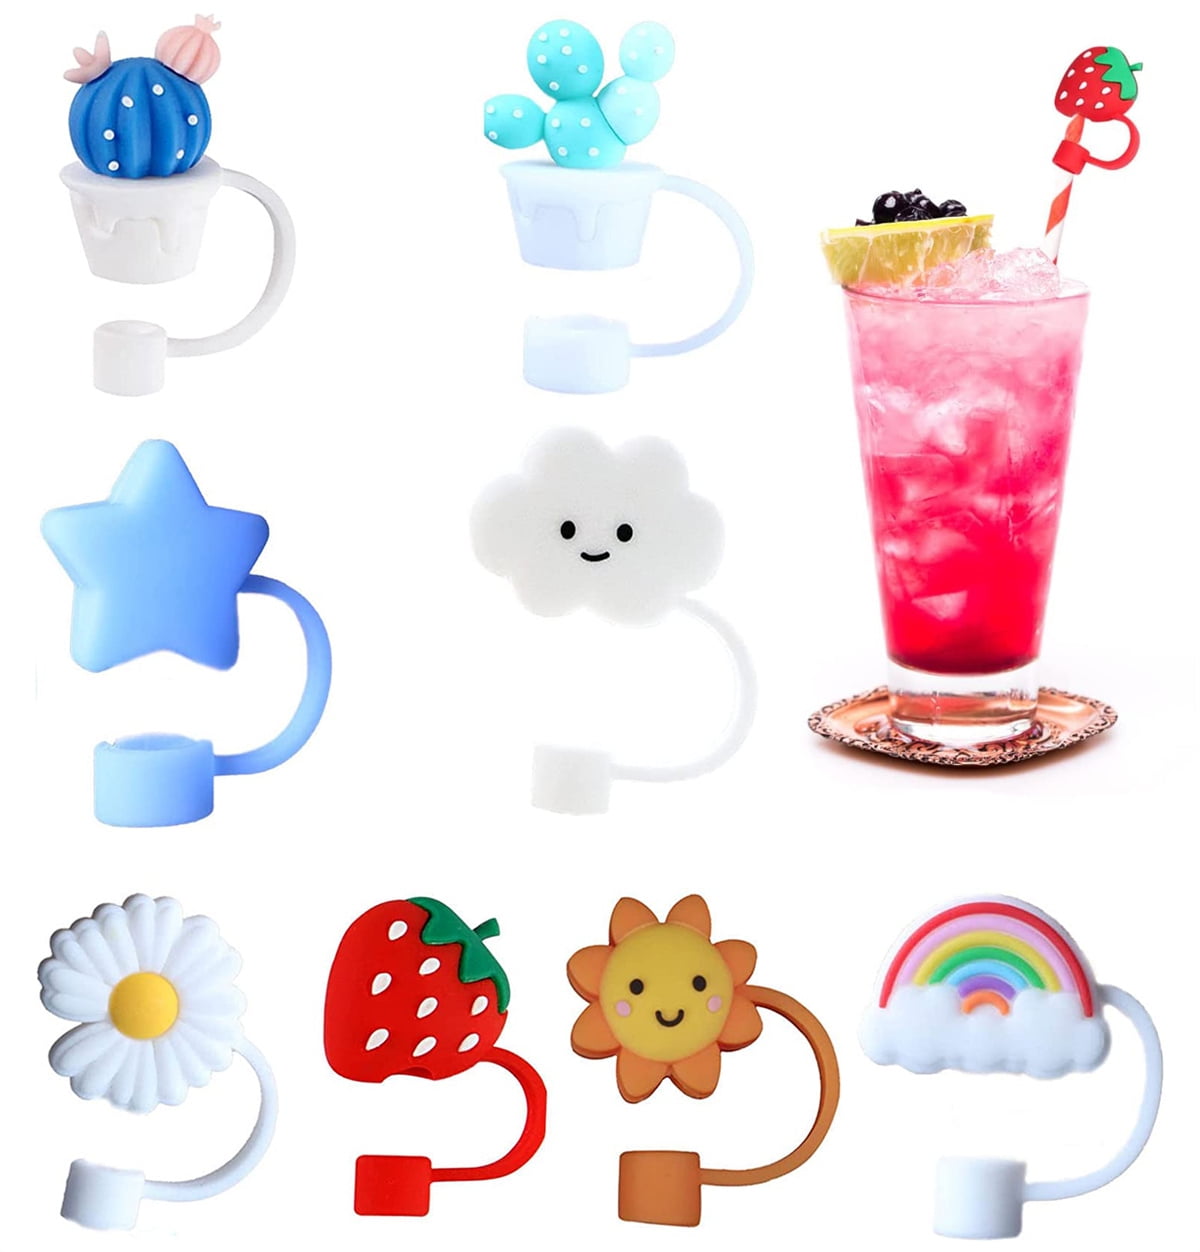 Reusable Silicone Straw Topper With Splash Proof Cover Charms And Dust Plug  Perfect For Sports Blue Motorcycle Drink And Parties 8mm Decorative Straw  In From Amandagogogo2022, $0.22